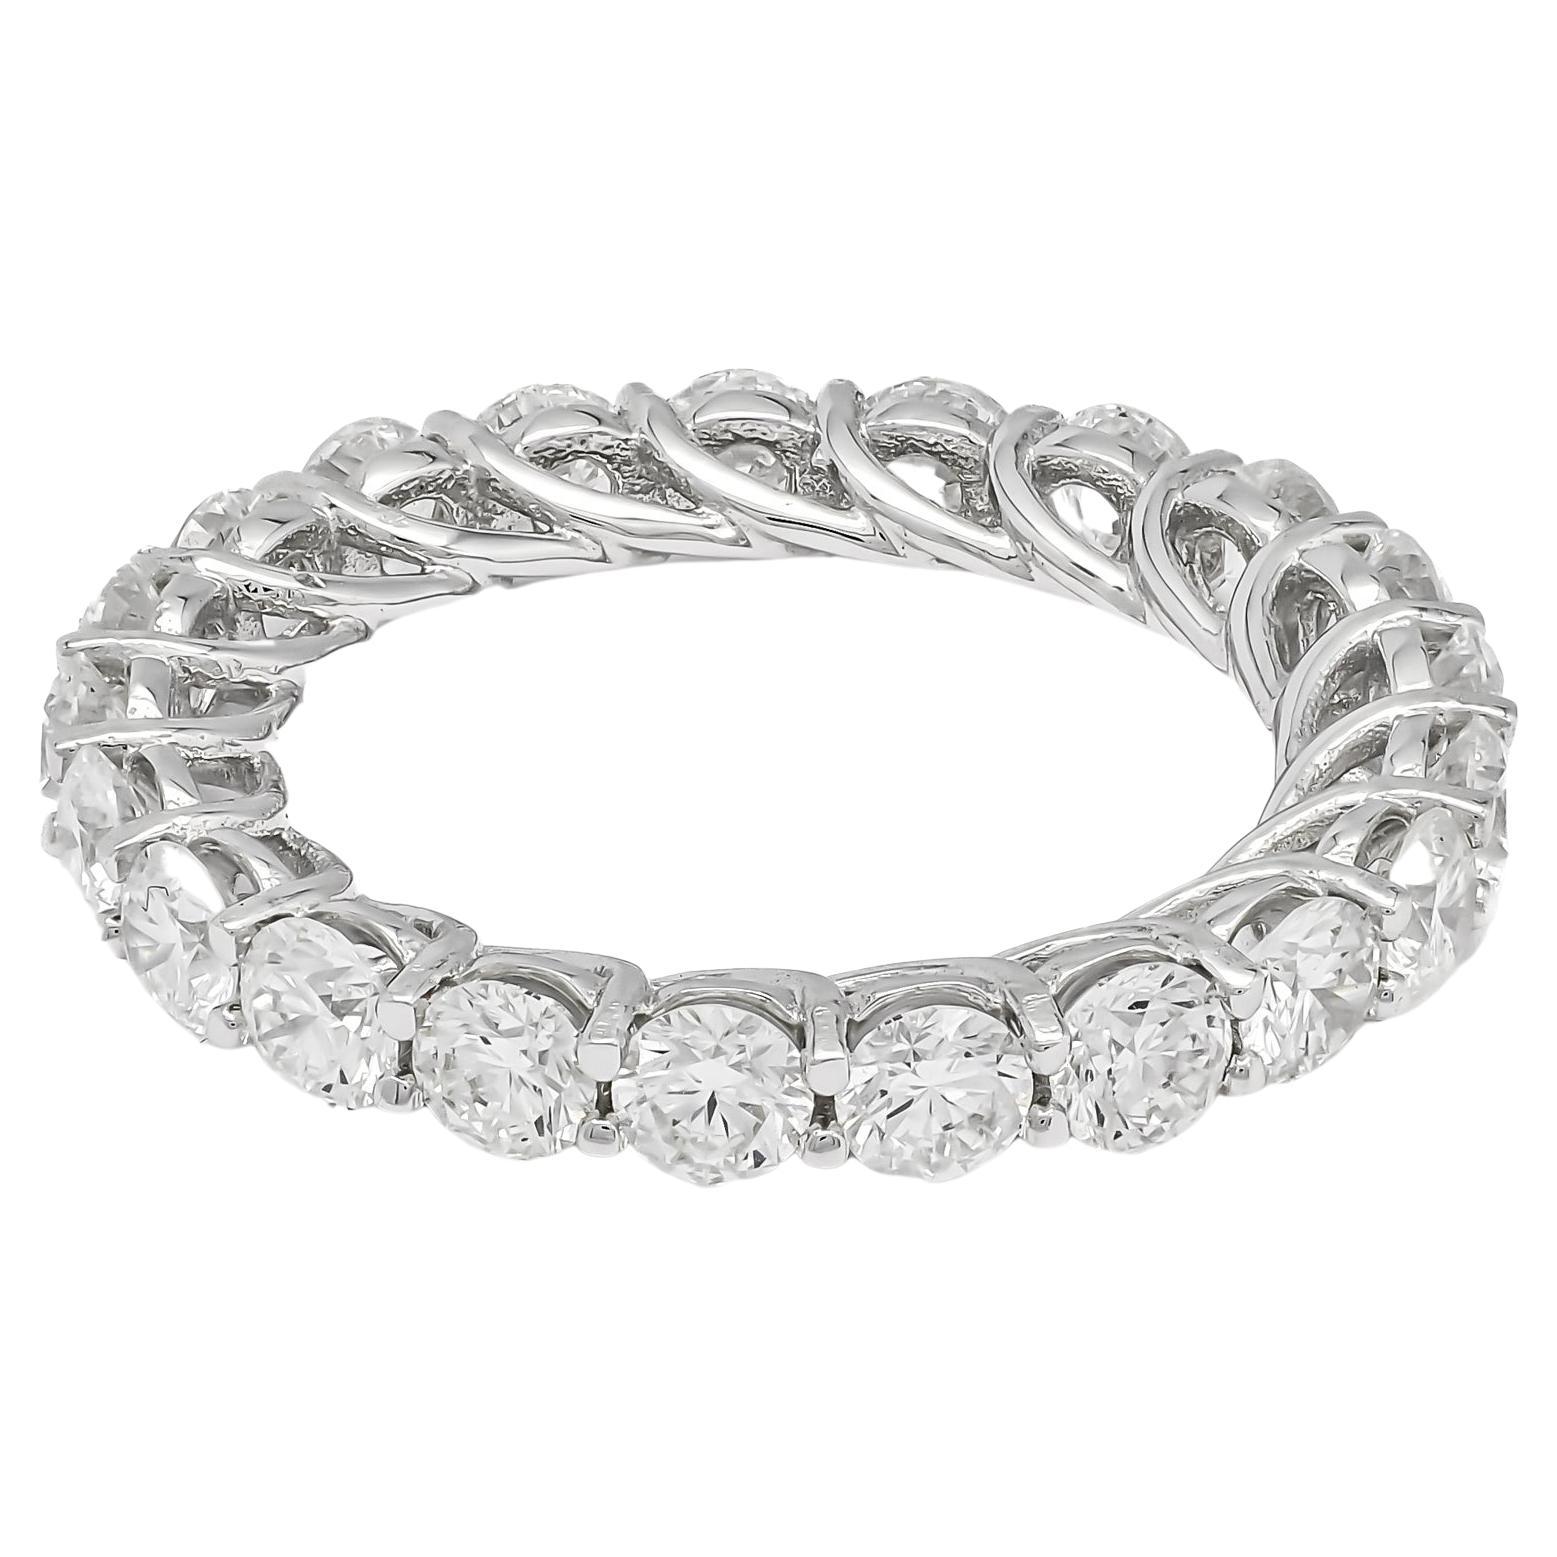 For Sale:  3.15 Carat Full Eternity Natural Diamond Ring in White Gold with 4 Prongs